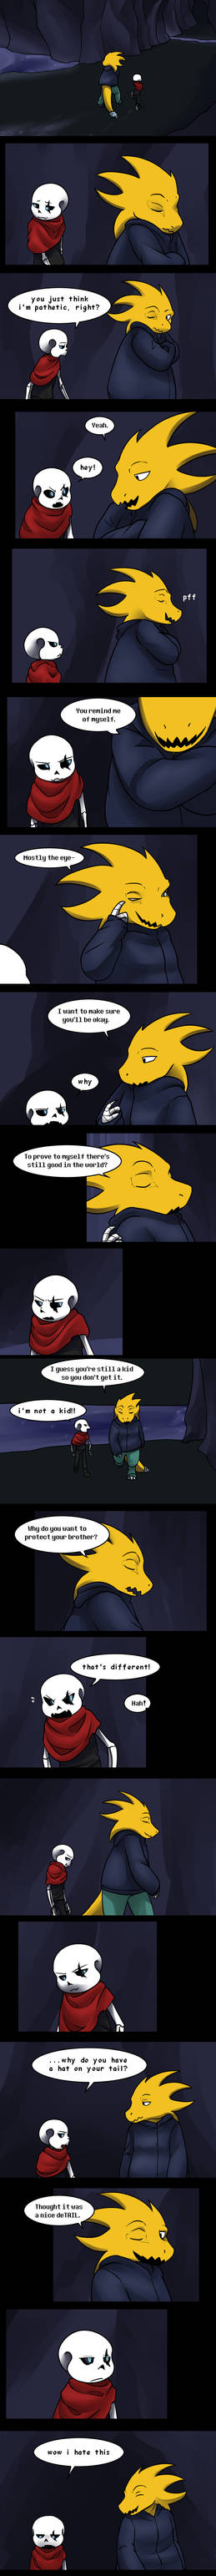 Swapfell Sans page 9 by Maxlad on DeviantArt